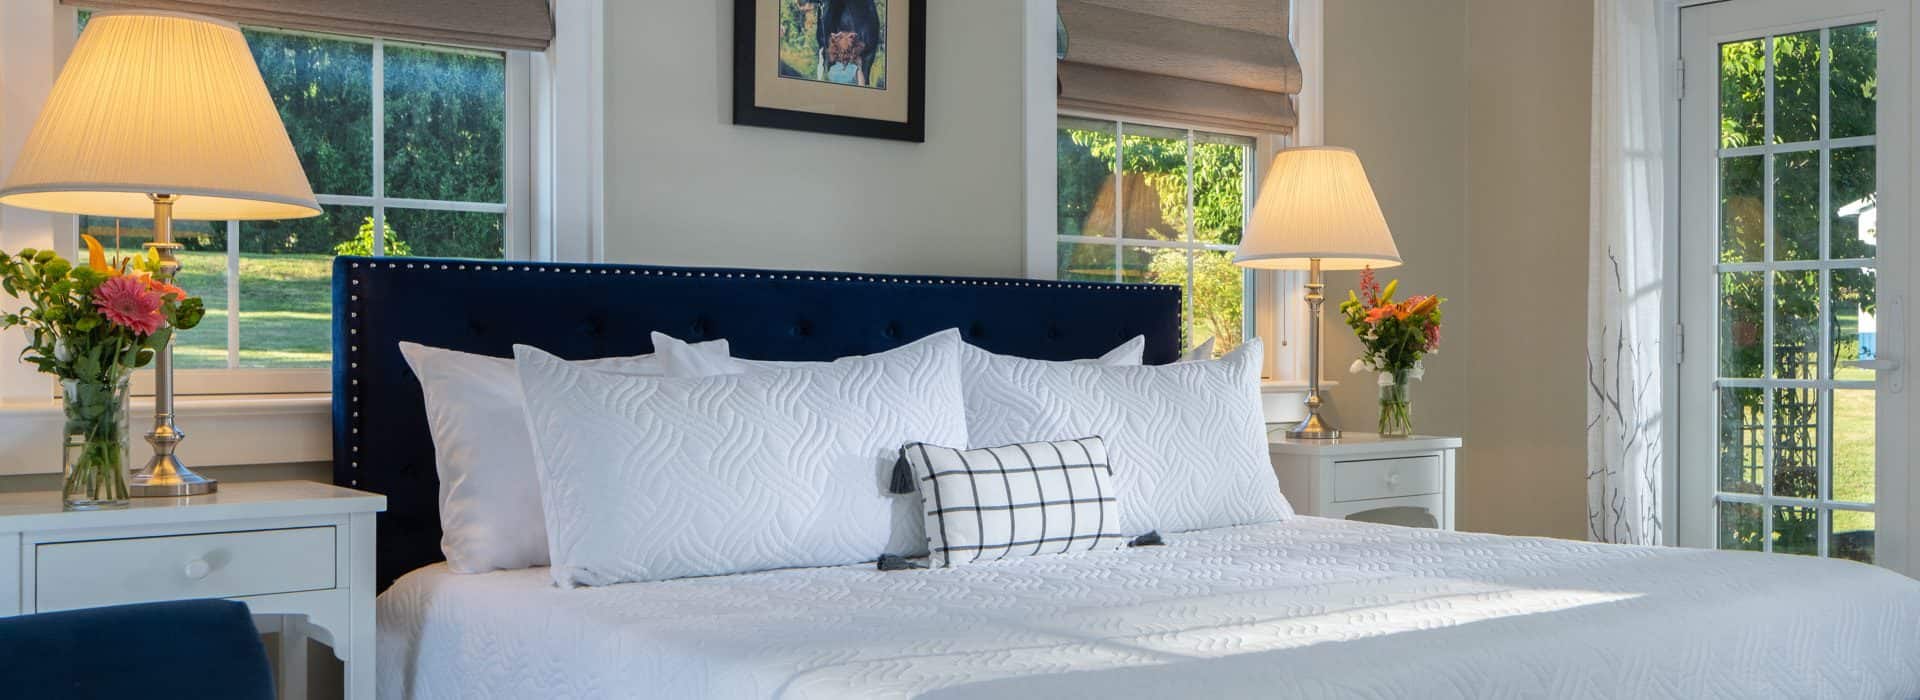 Close up view of navy upholstered bed, white bedding, white nightstands with lamps, and views to the outside